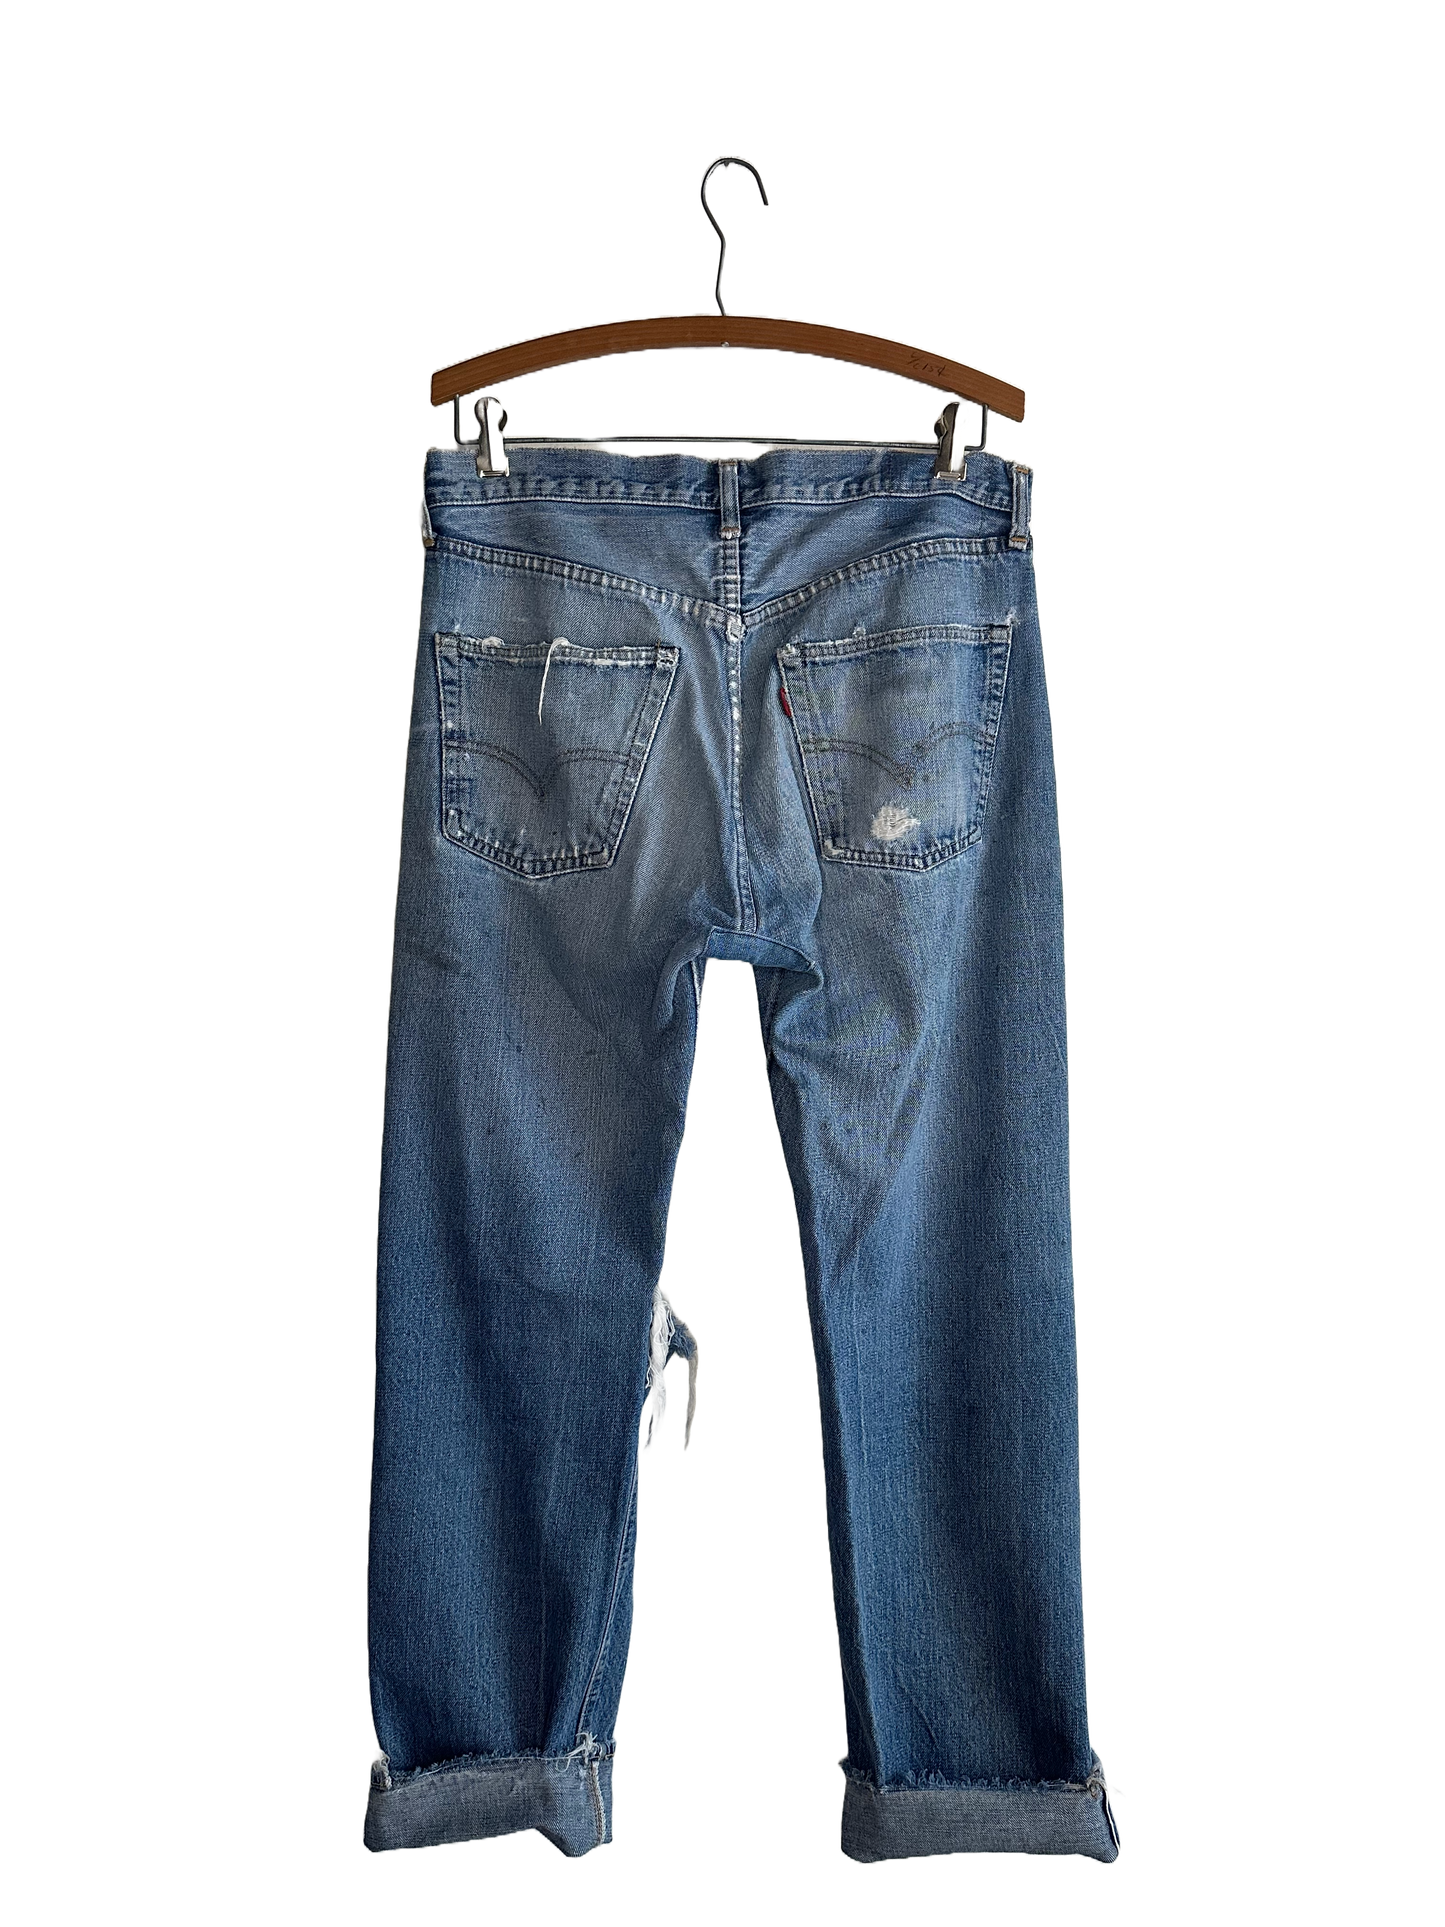 back view of jeans. 2 pockets 